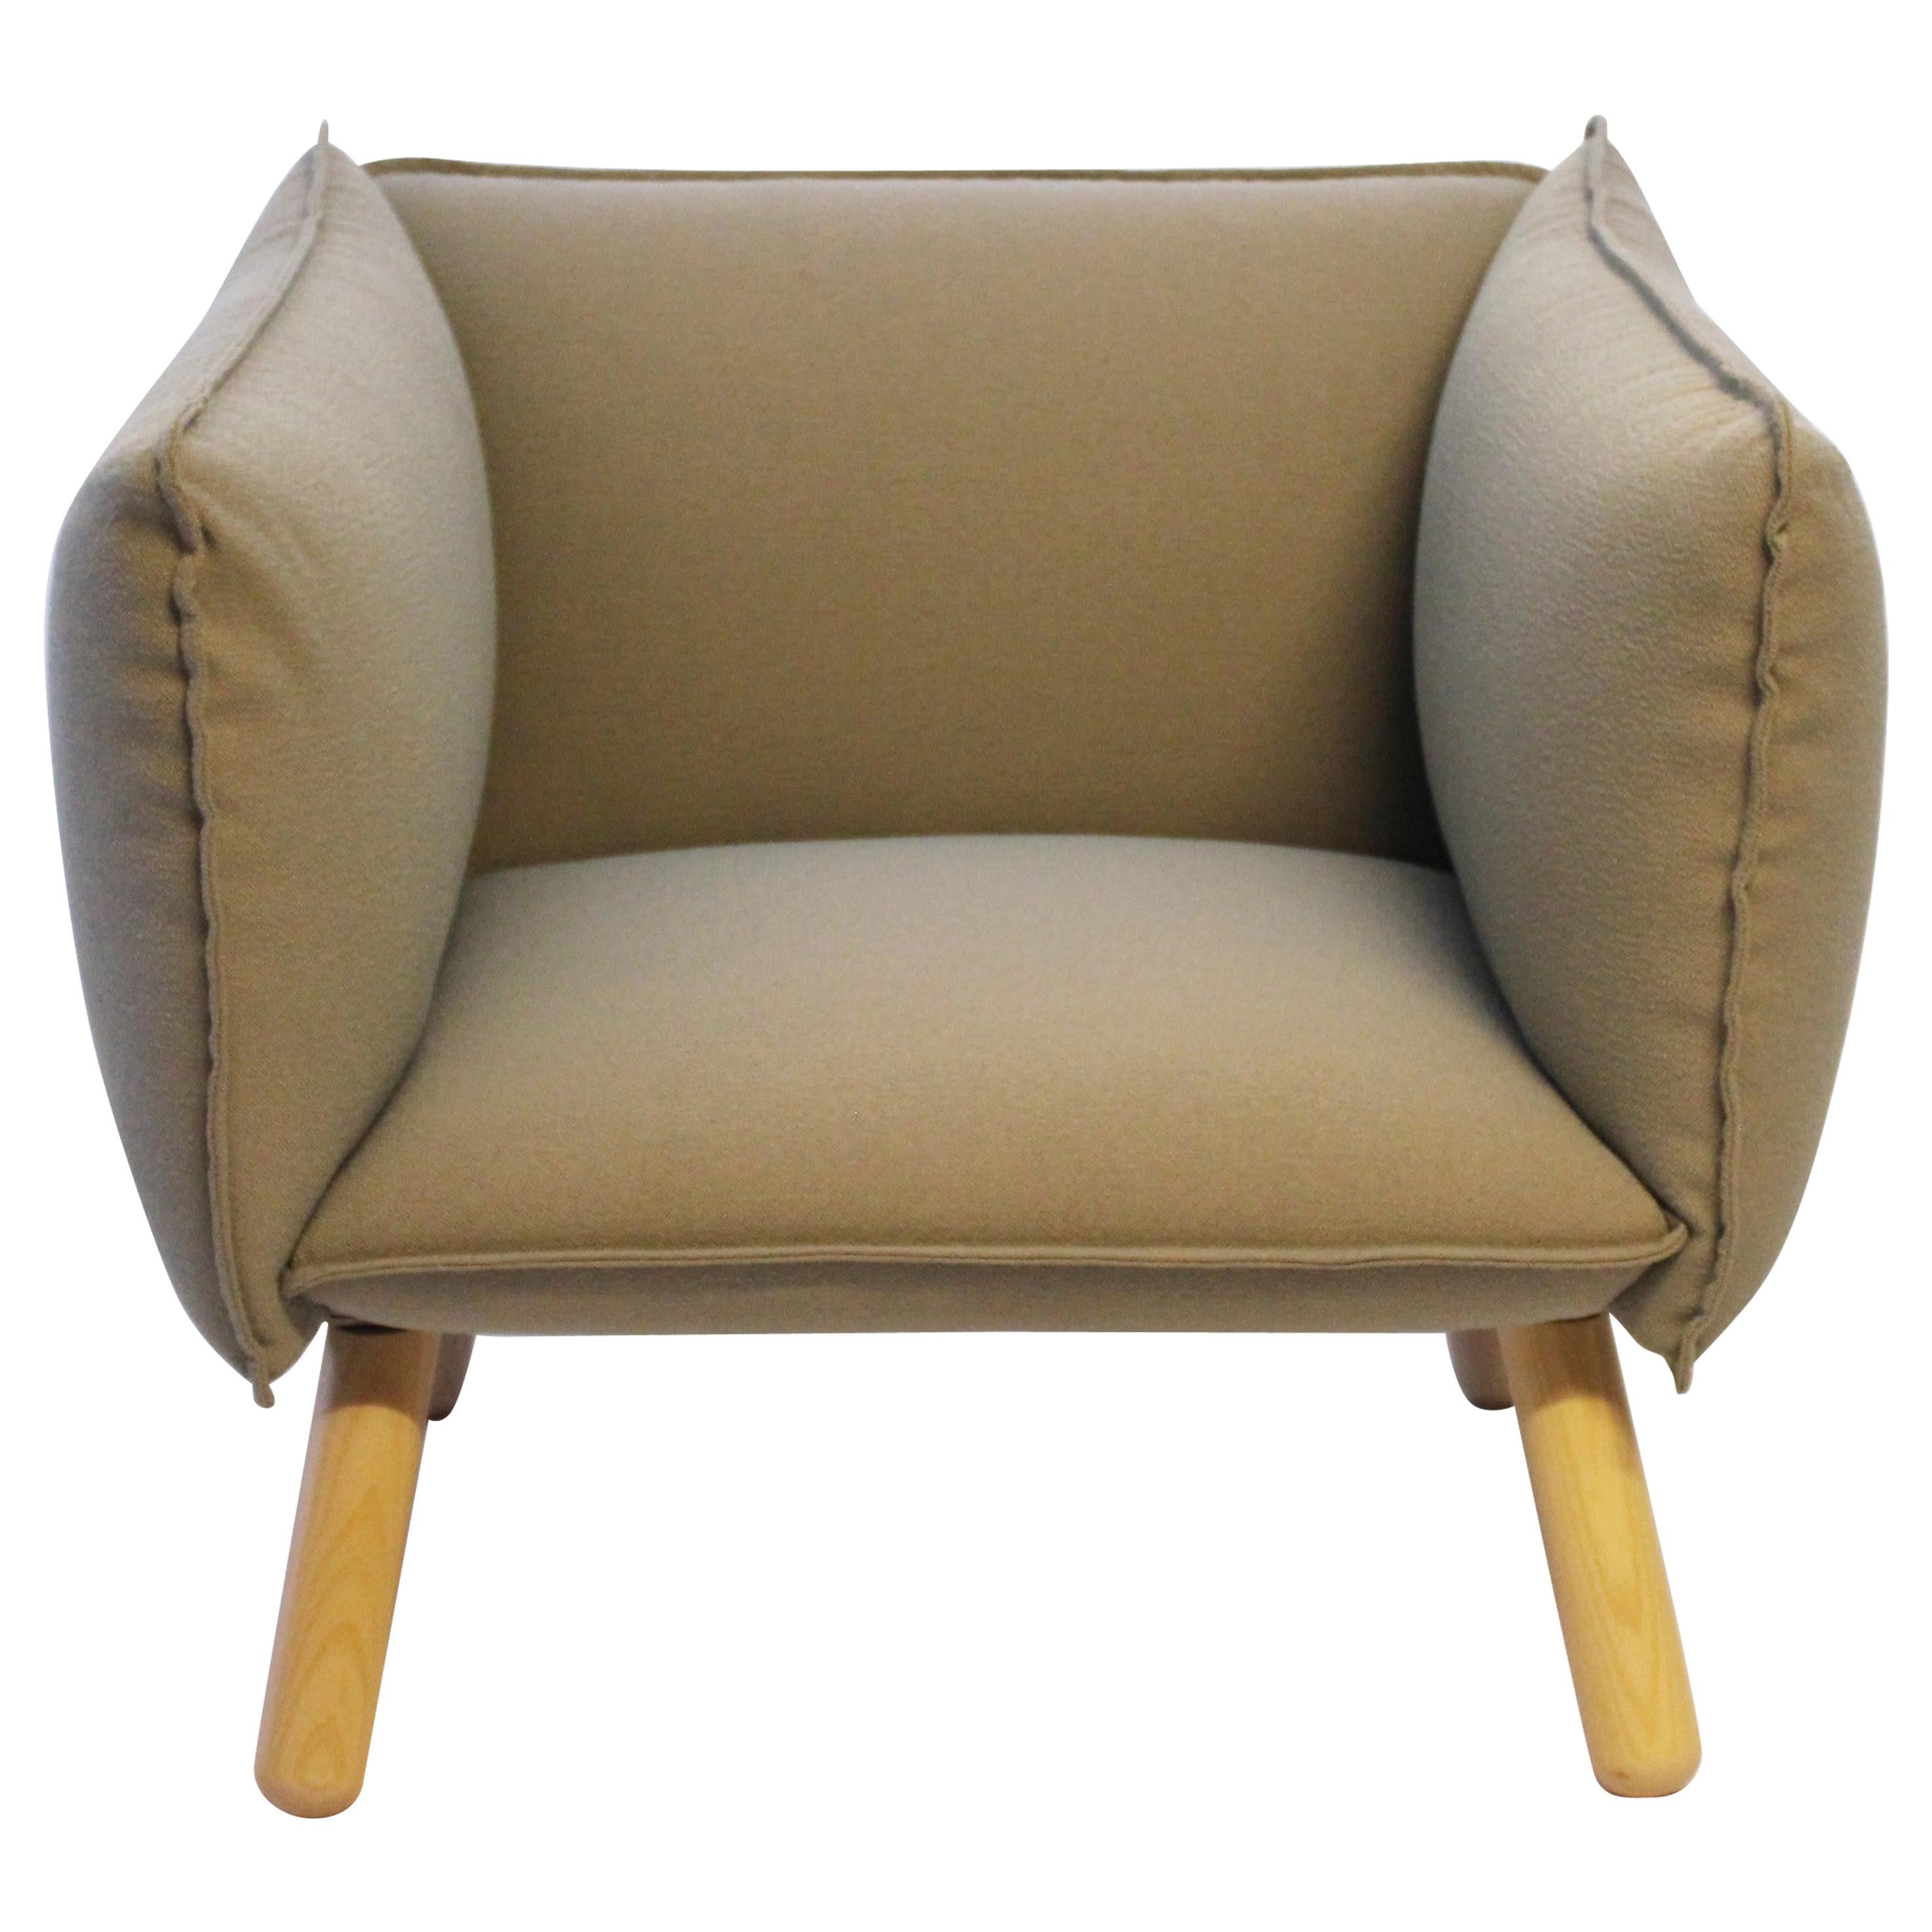 Dormi Lounge Chair with Grey Fabric by the Swedish Ire Furniture